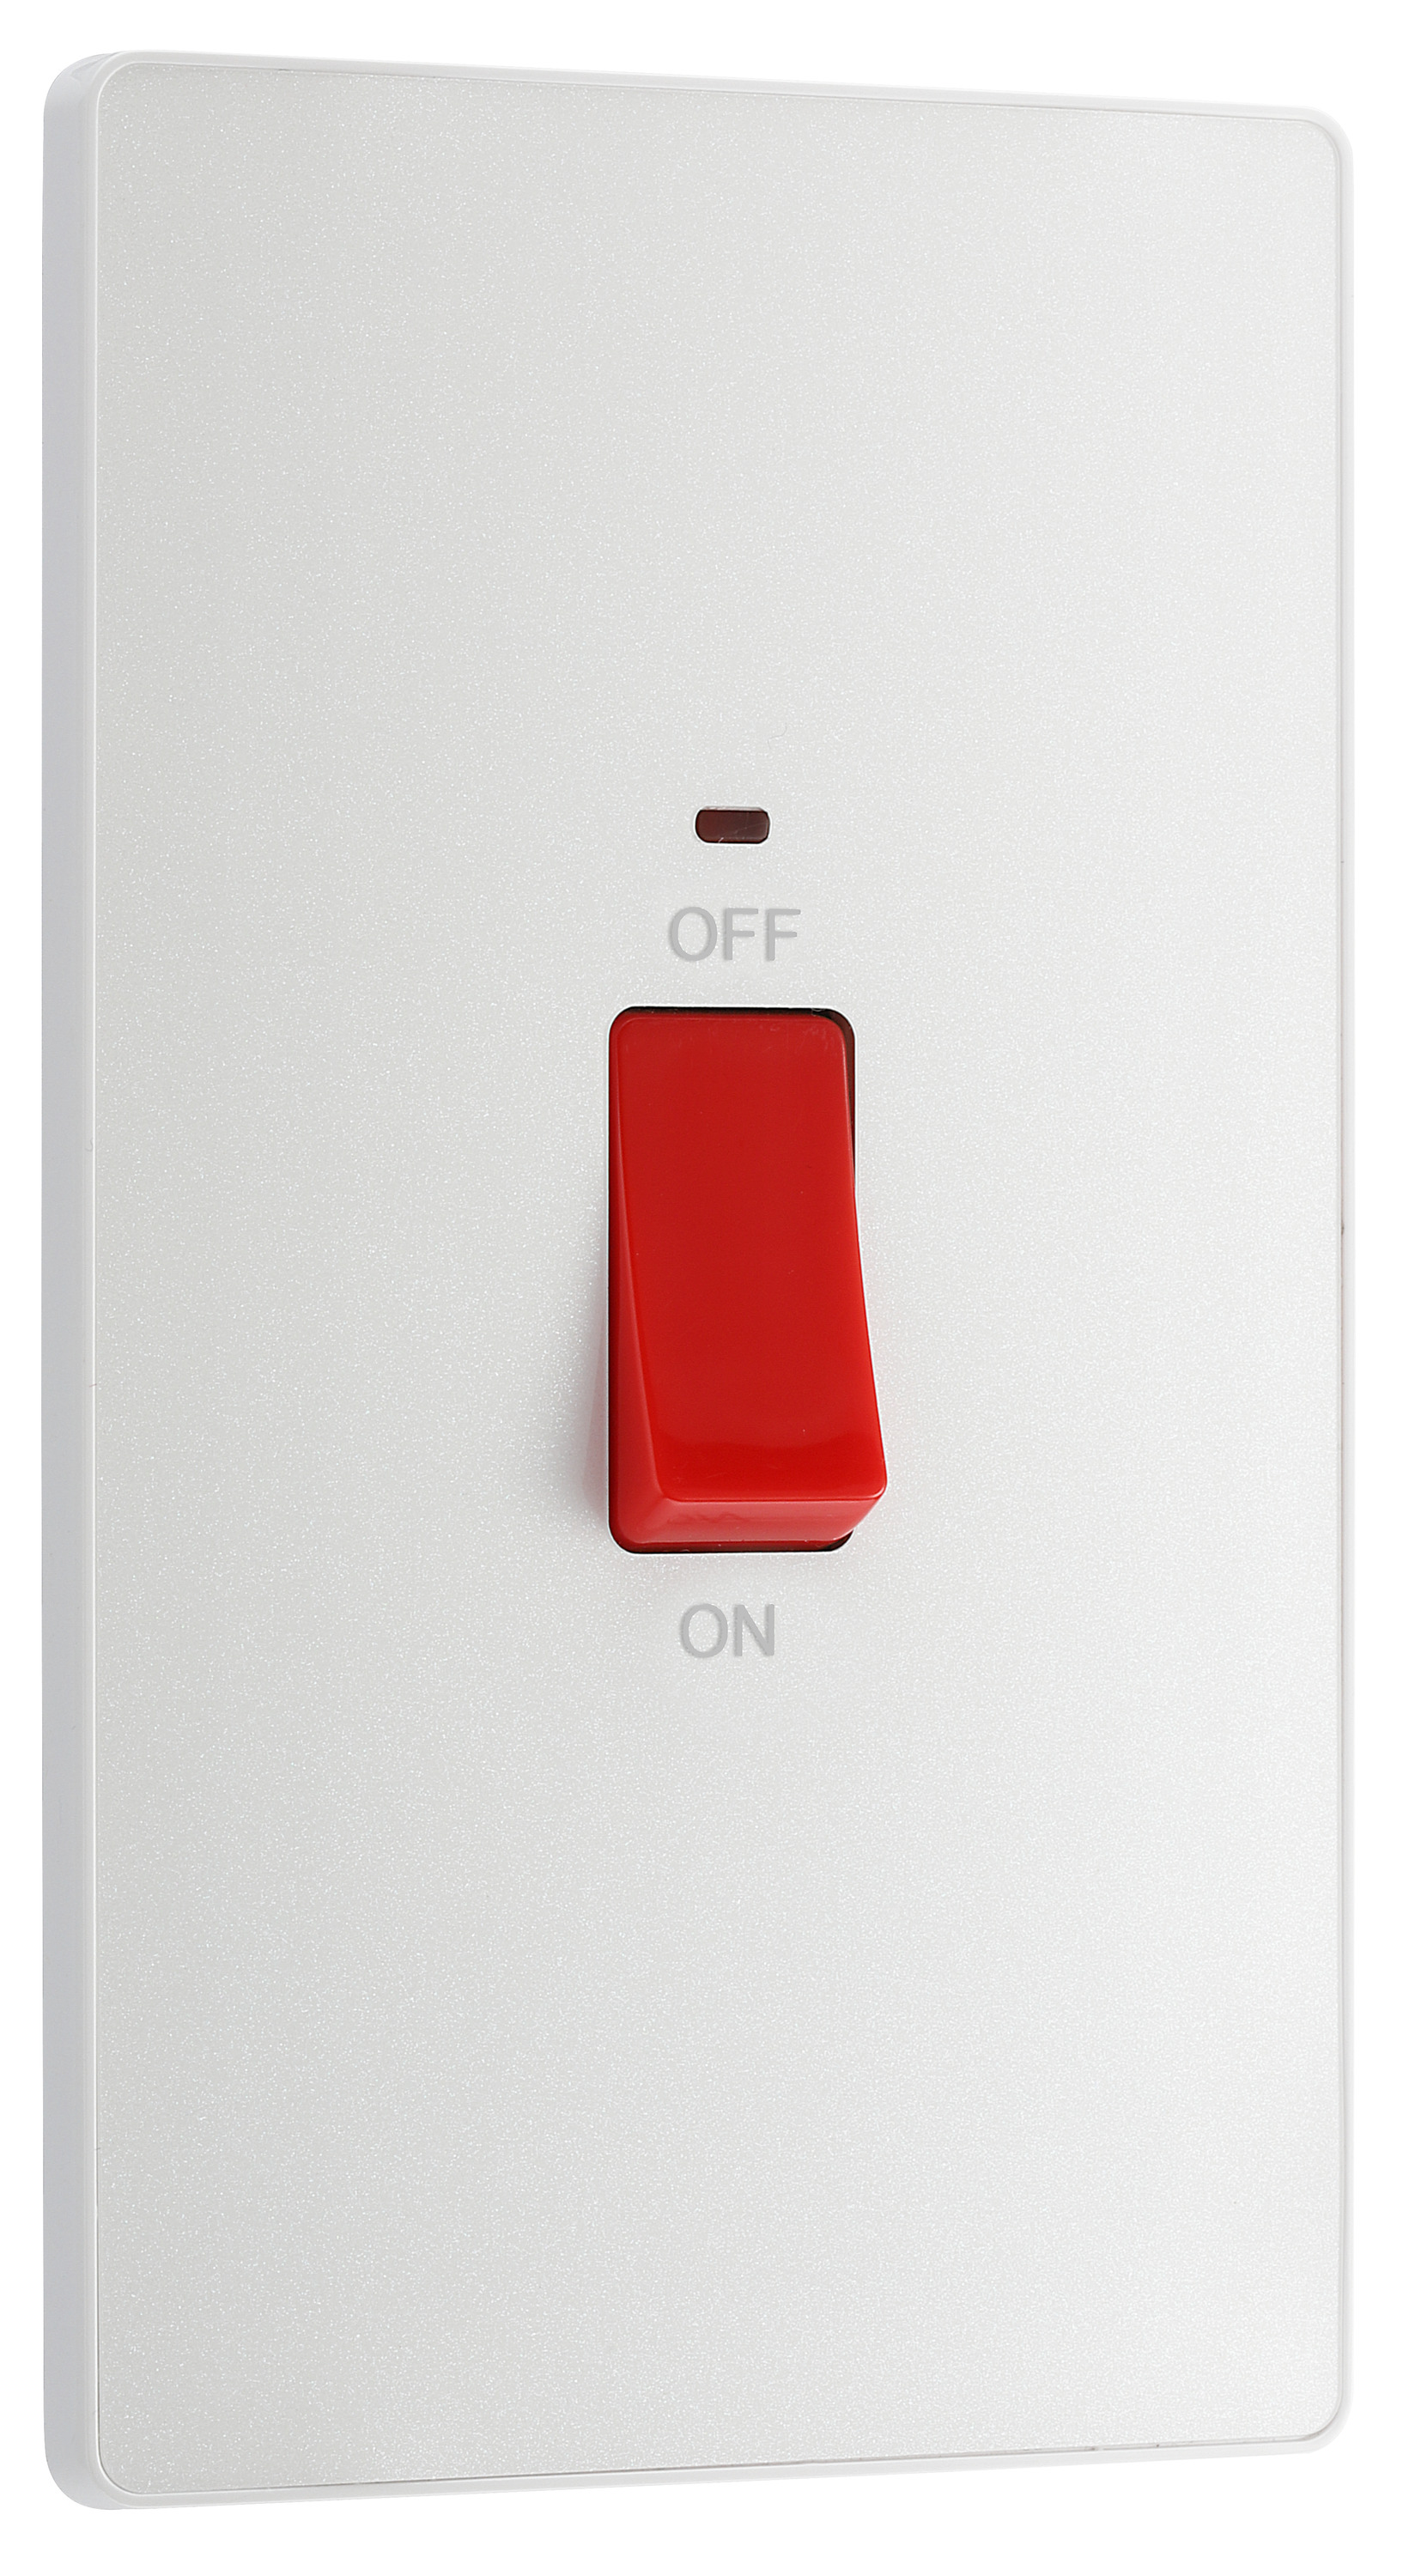 BG Evolve Pearlescent White 45A Rectangular Cooker Control Unit Switch